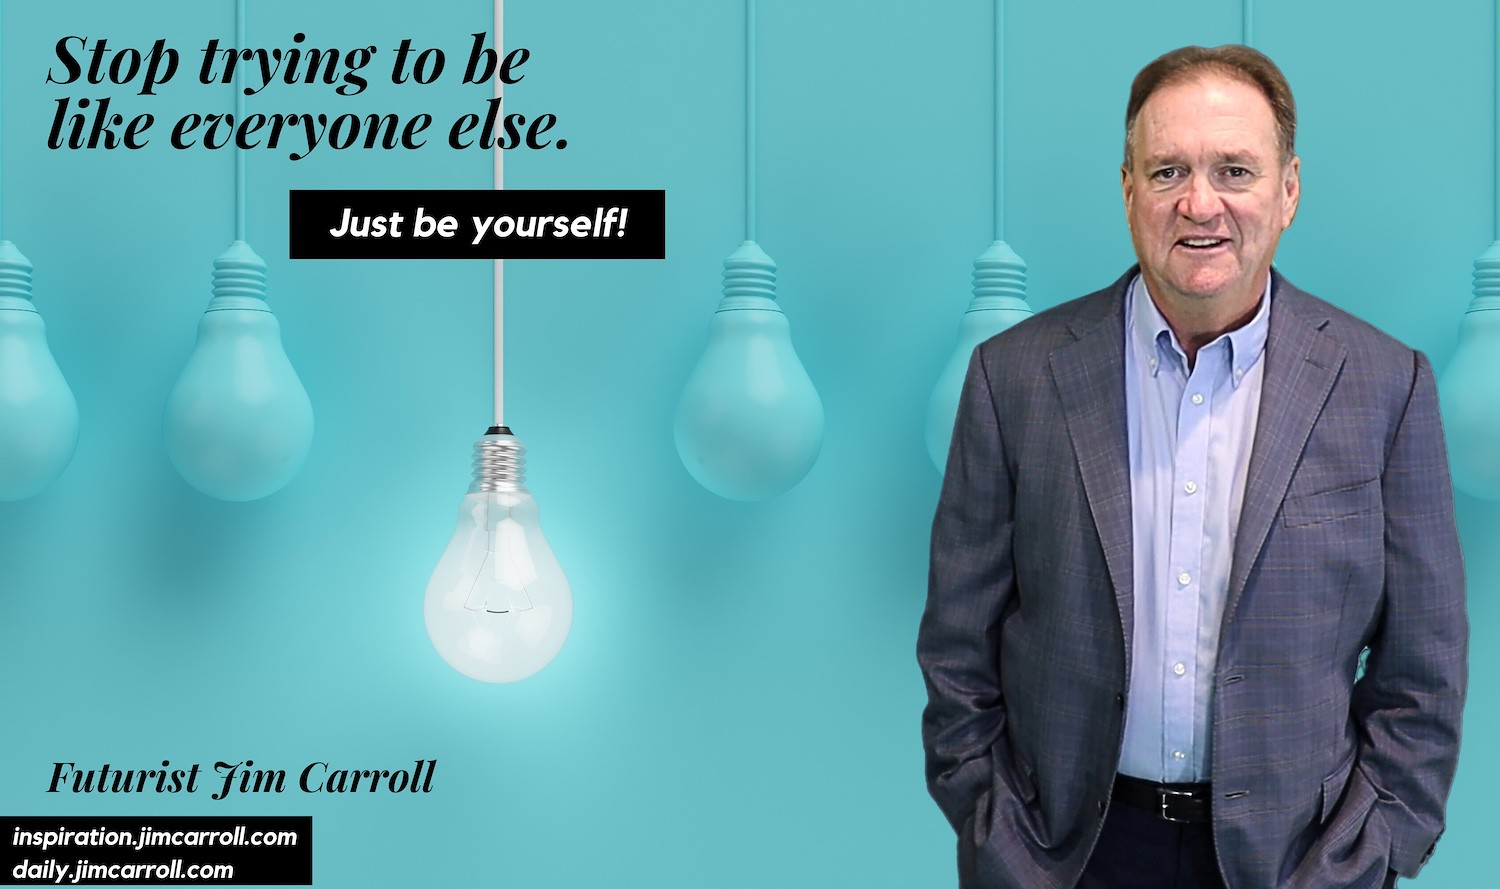 "Stop trying to be like everyone else. Just be yourself!" - Futurist Jim Carroll